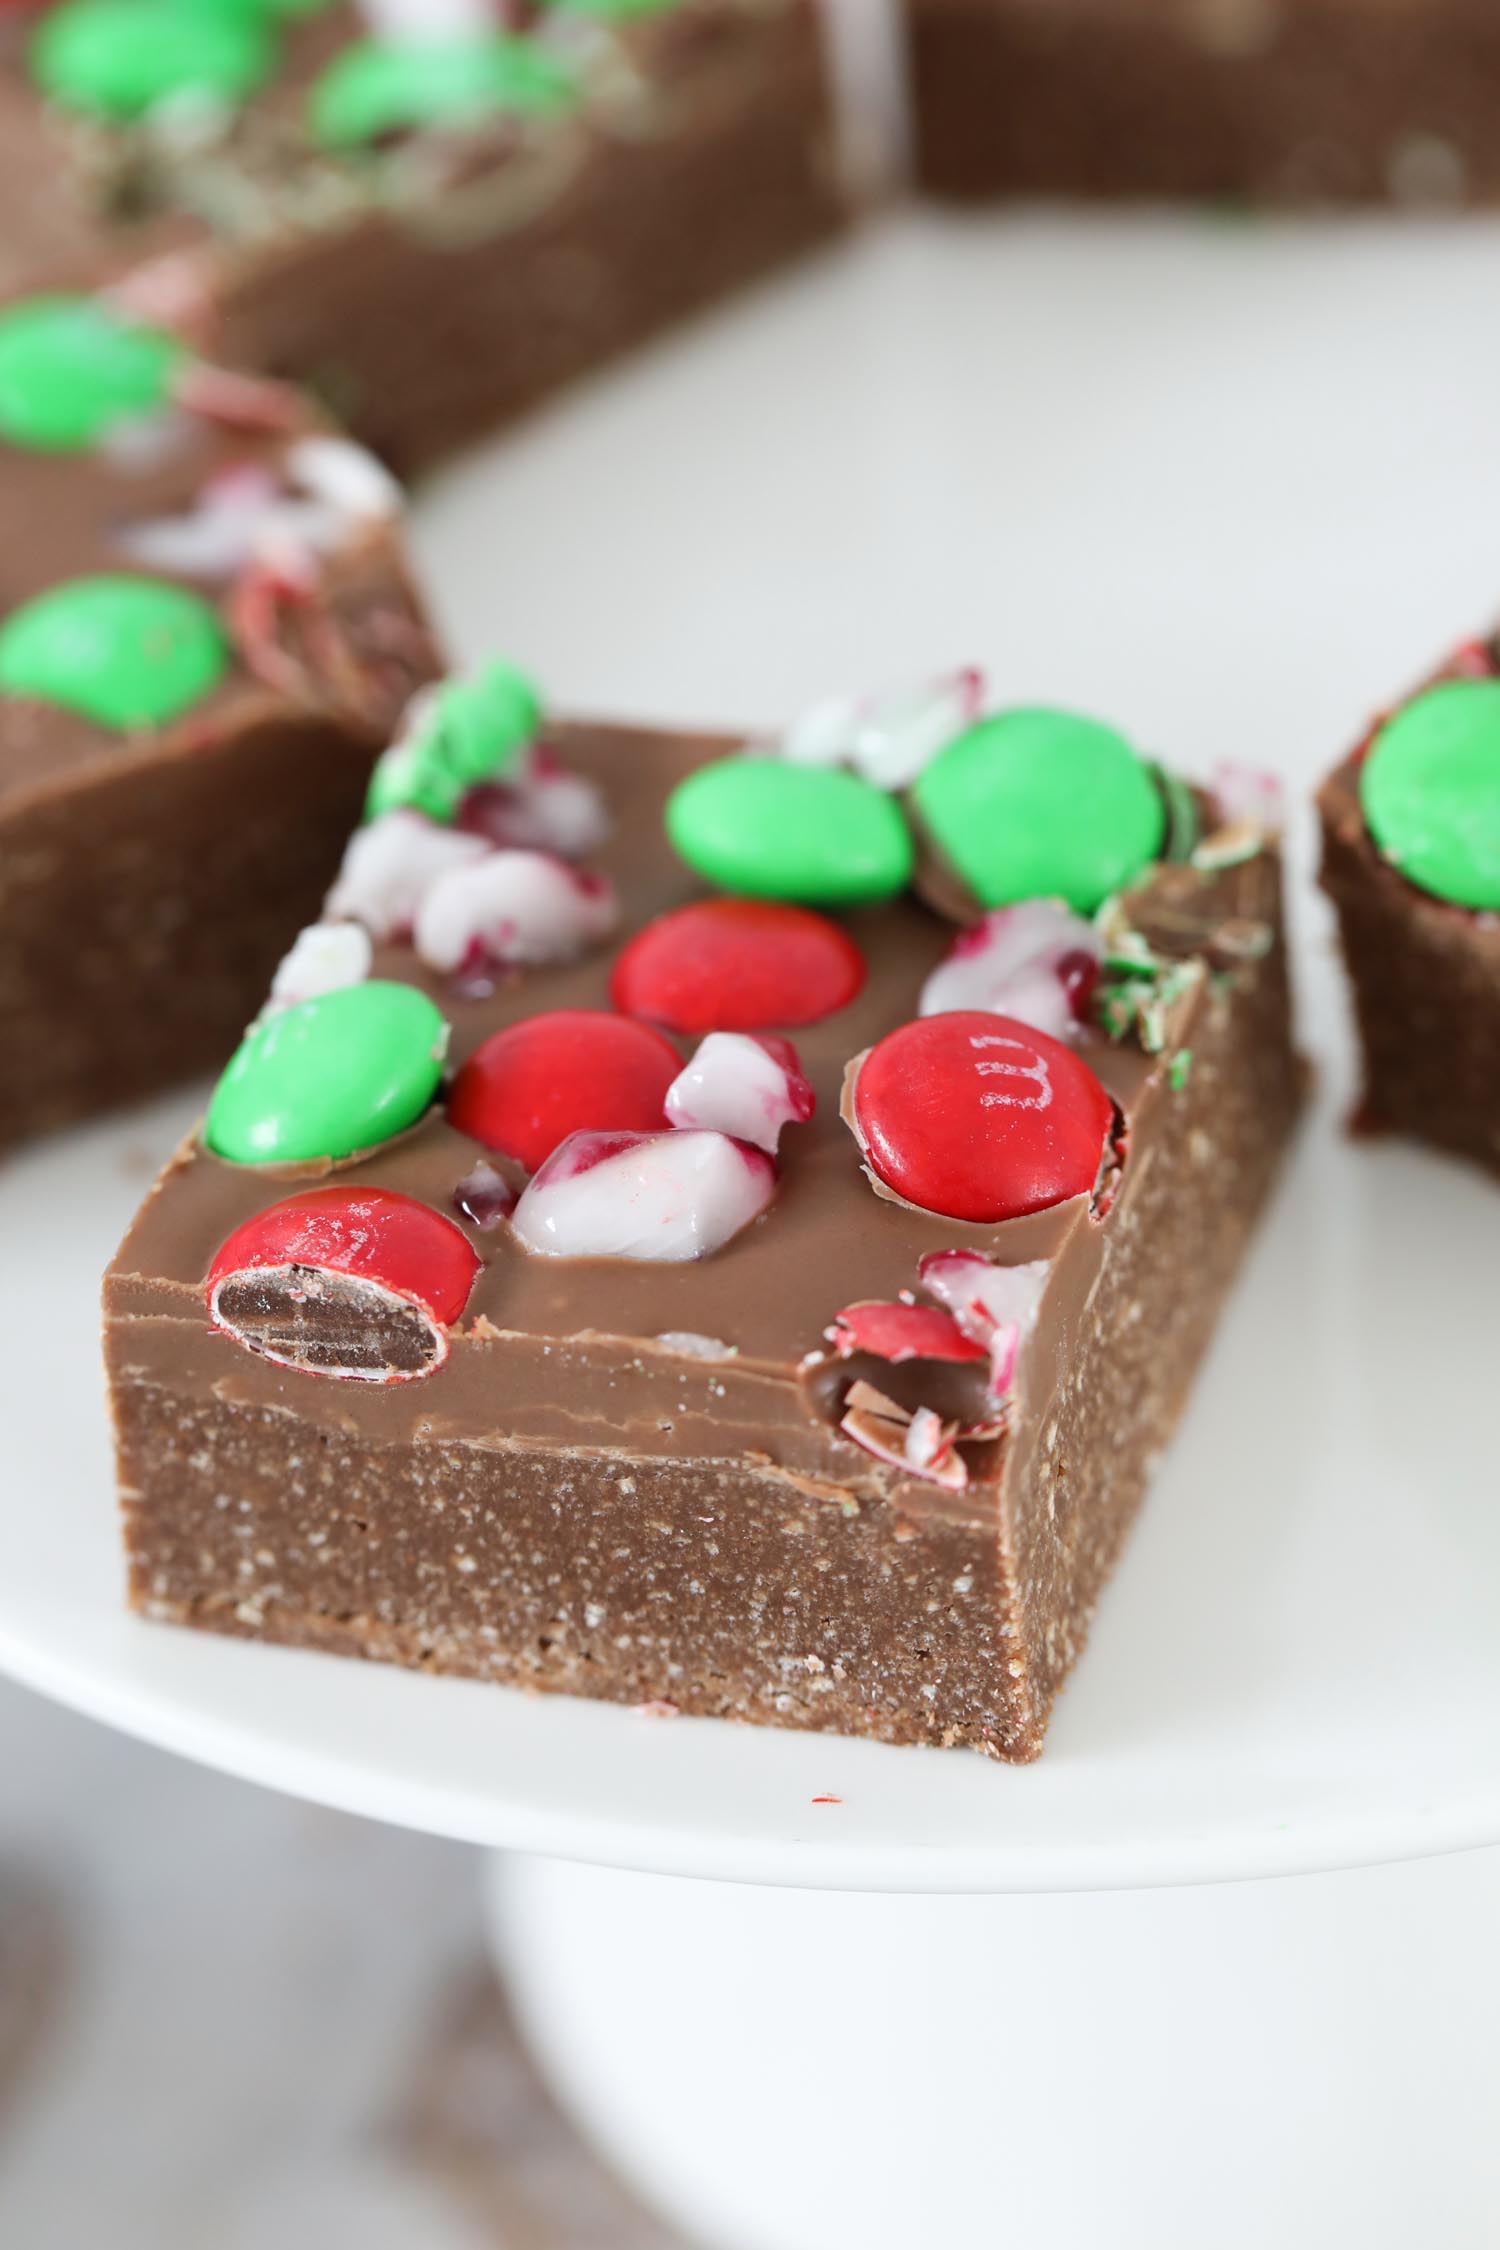 A close up of a piece of chocolate slice with milk chocolate, M&Ms and crushed candy canes on top.